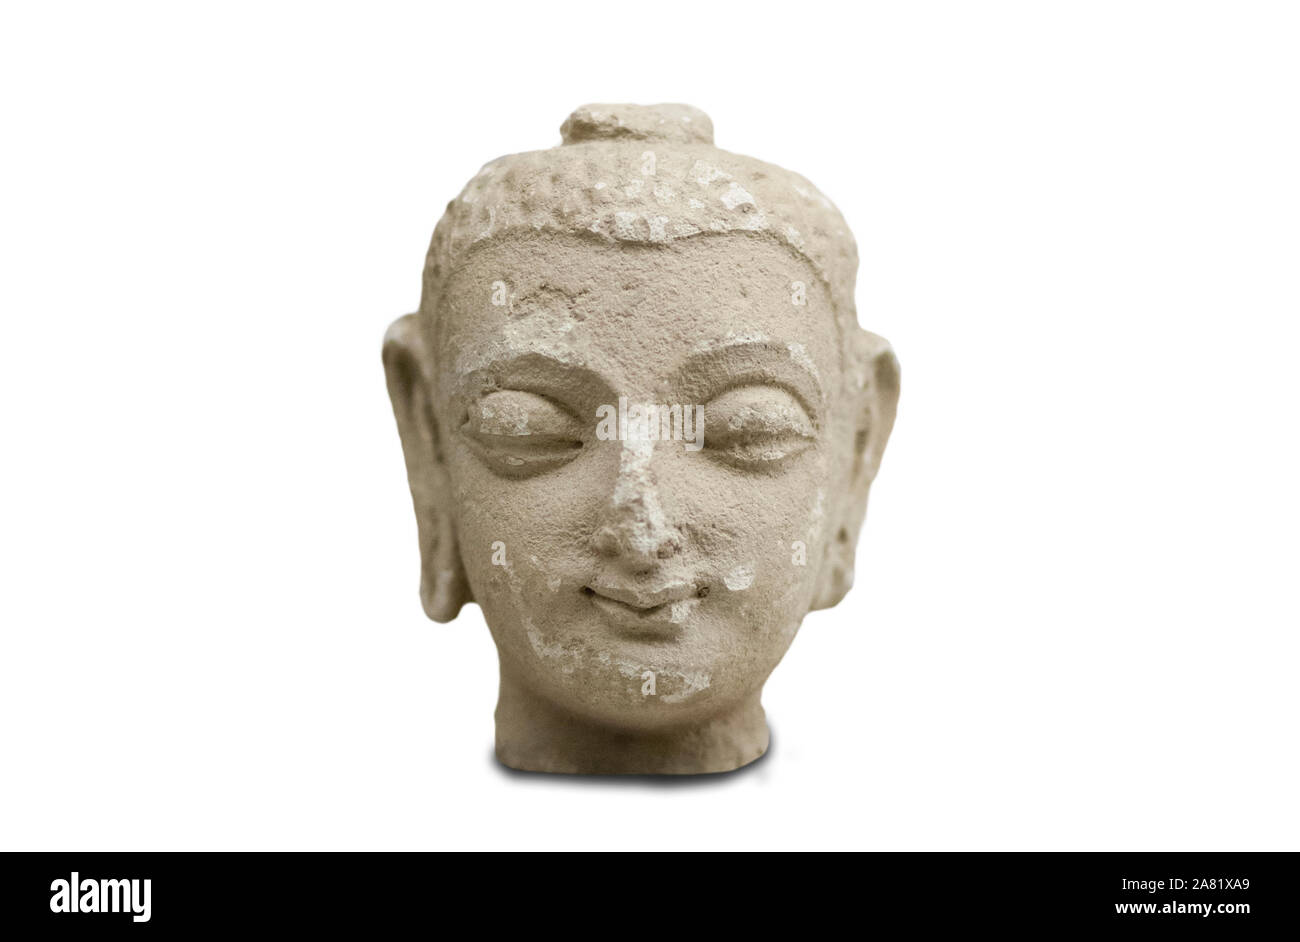 Madrid, Spain - Sept 12th, 2018: Stucco head of buddha figurine from Gandara, northeast Afghanistan. 5th Century AC. National Anthropology Museum, Mad Stock Photo